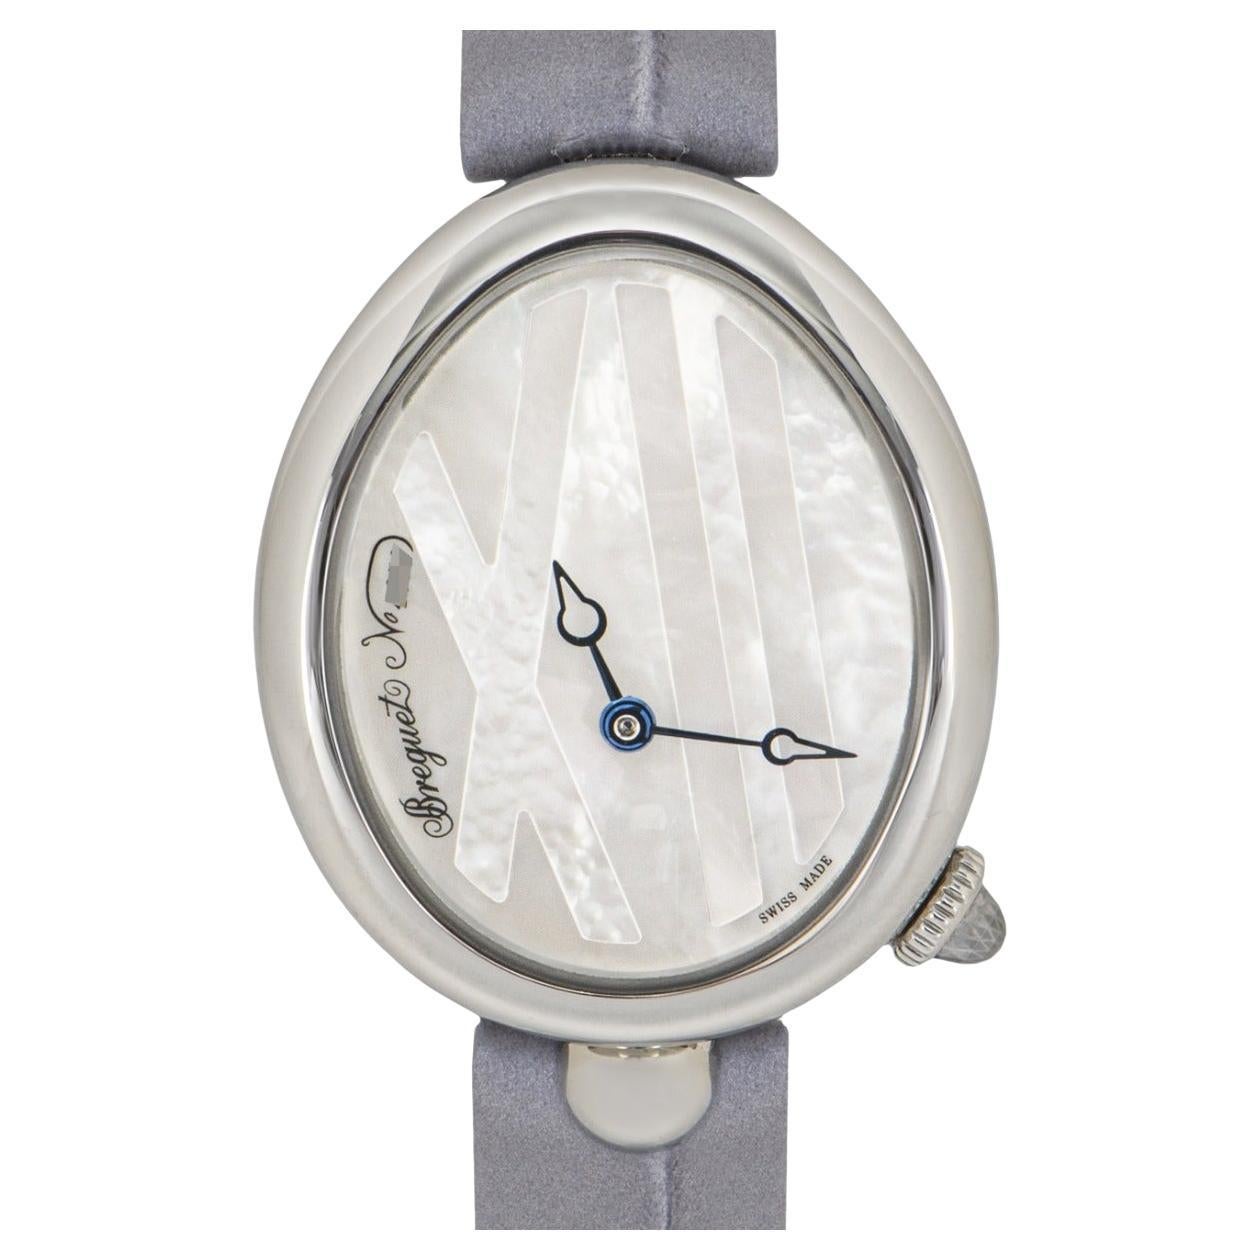 A ladies 27mm Reine De Naples crafted in stainless steel by Breguet. Featuring a distinctive mother of pearl dial with blued steel hands. Complementing the dial is a fixed smooth stainless steel bezel with a coin edge finish that is synonymous with